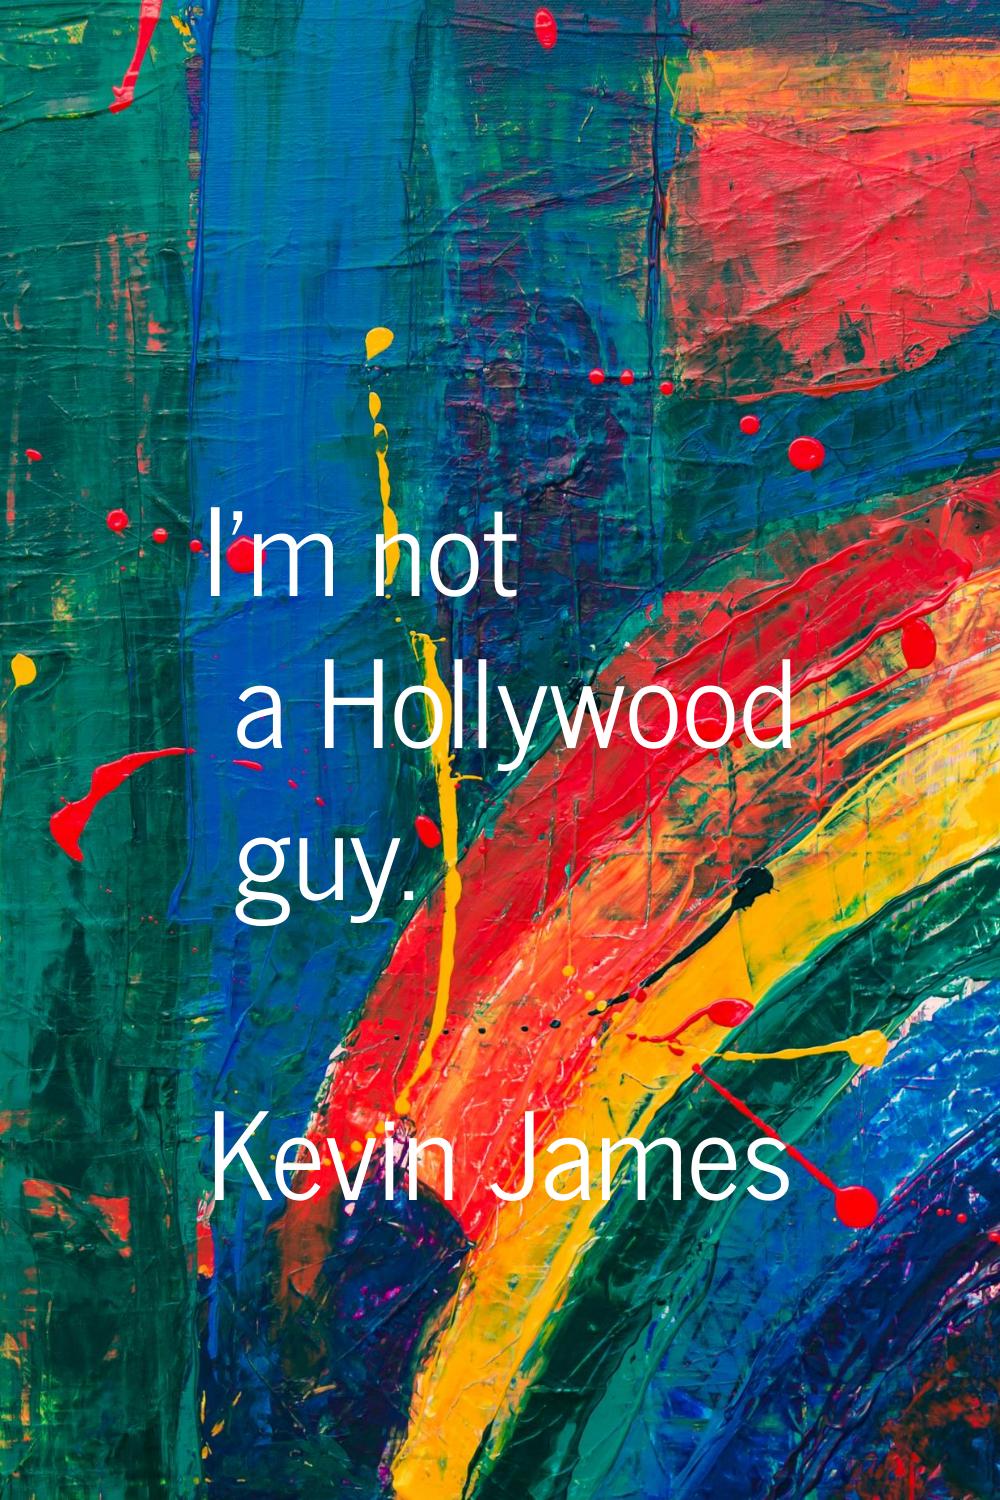 I'm not a Hollywood guy.